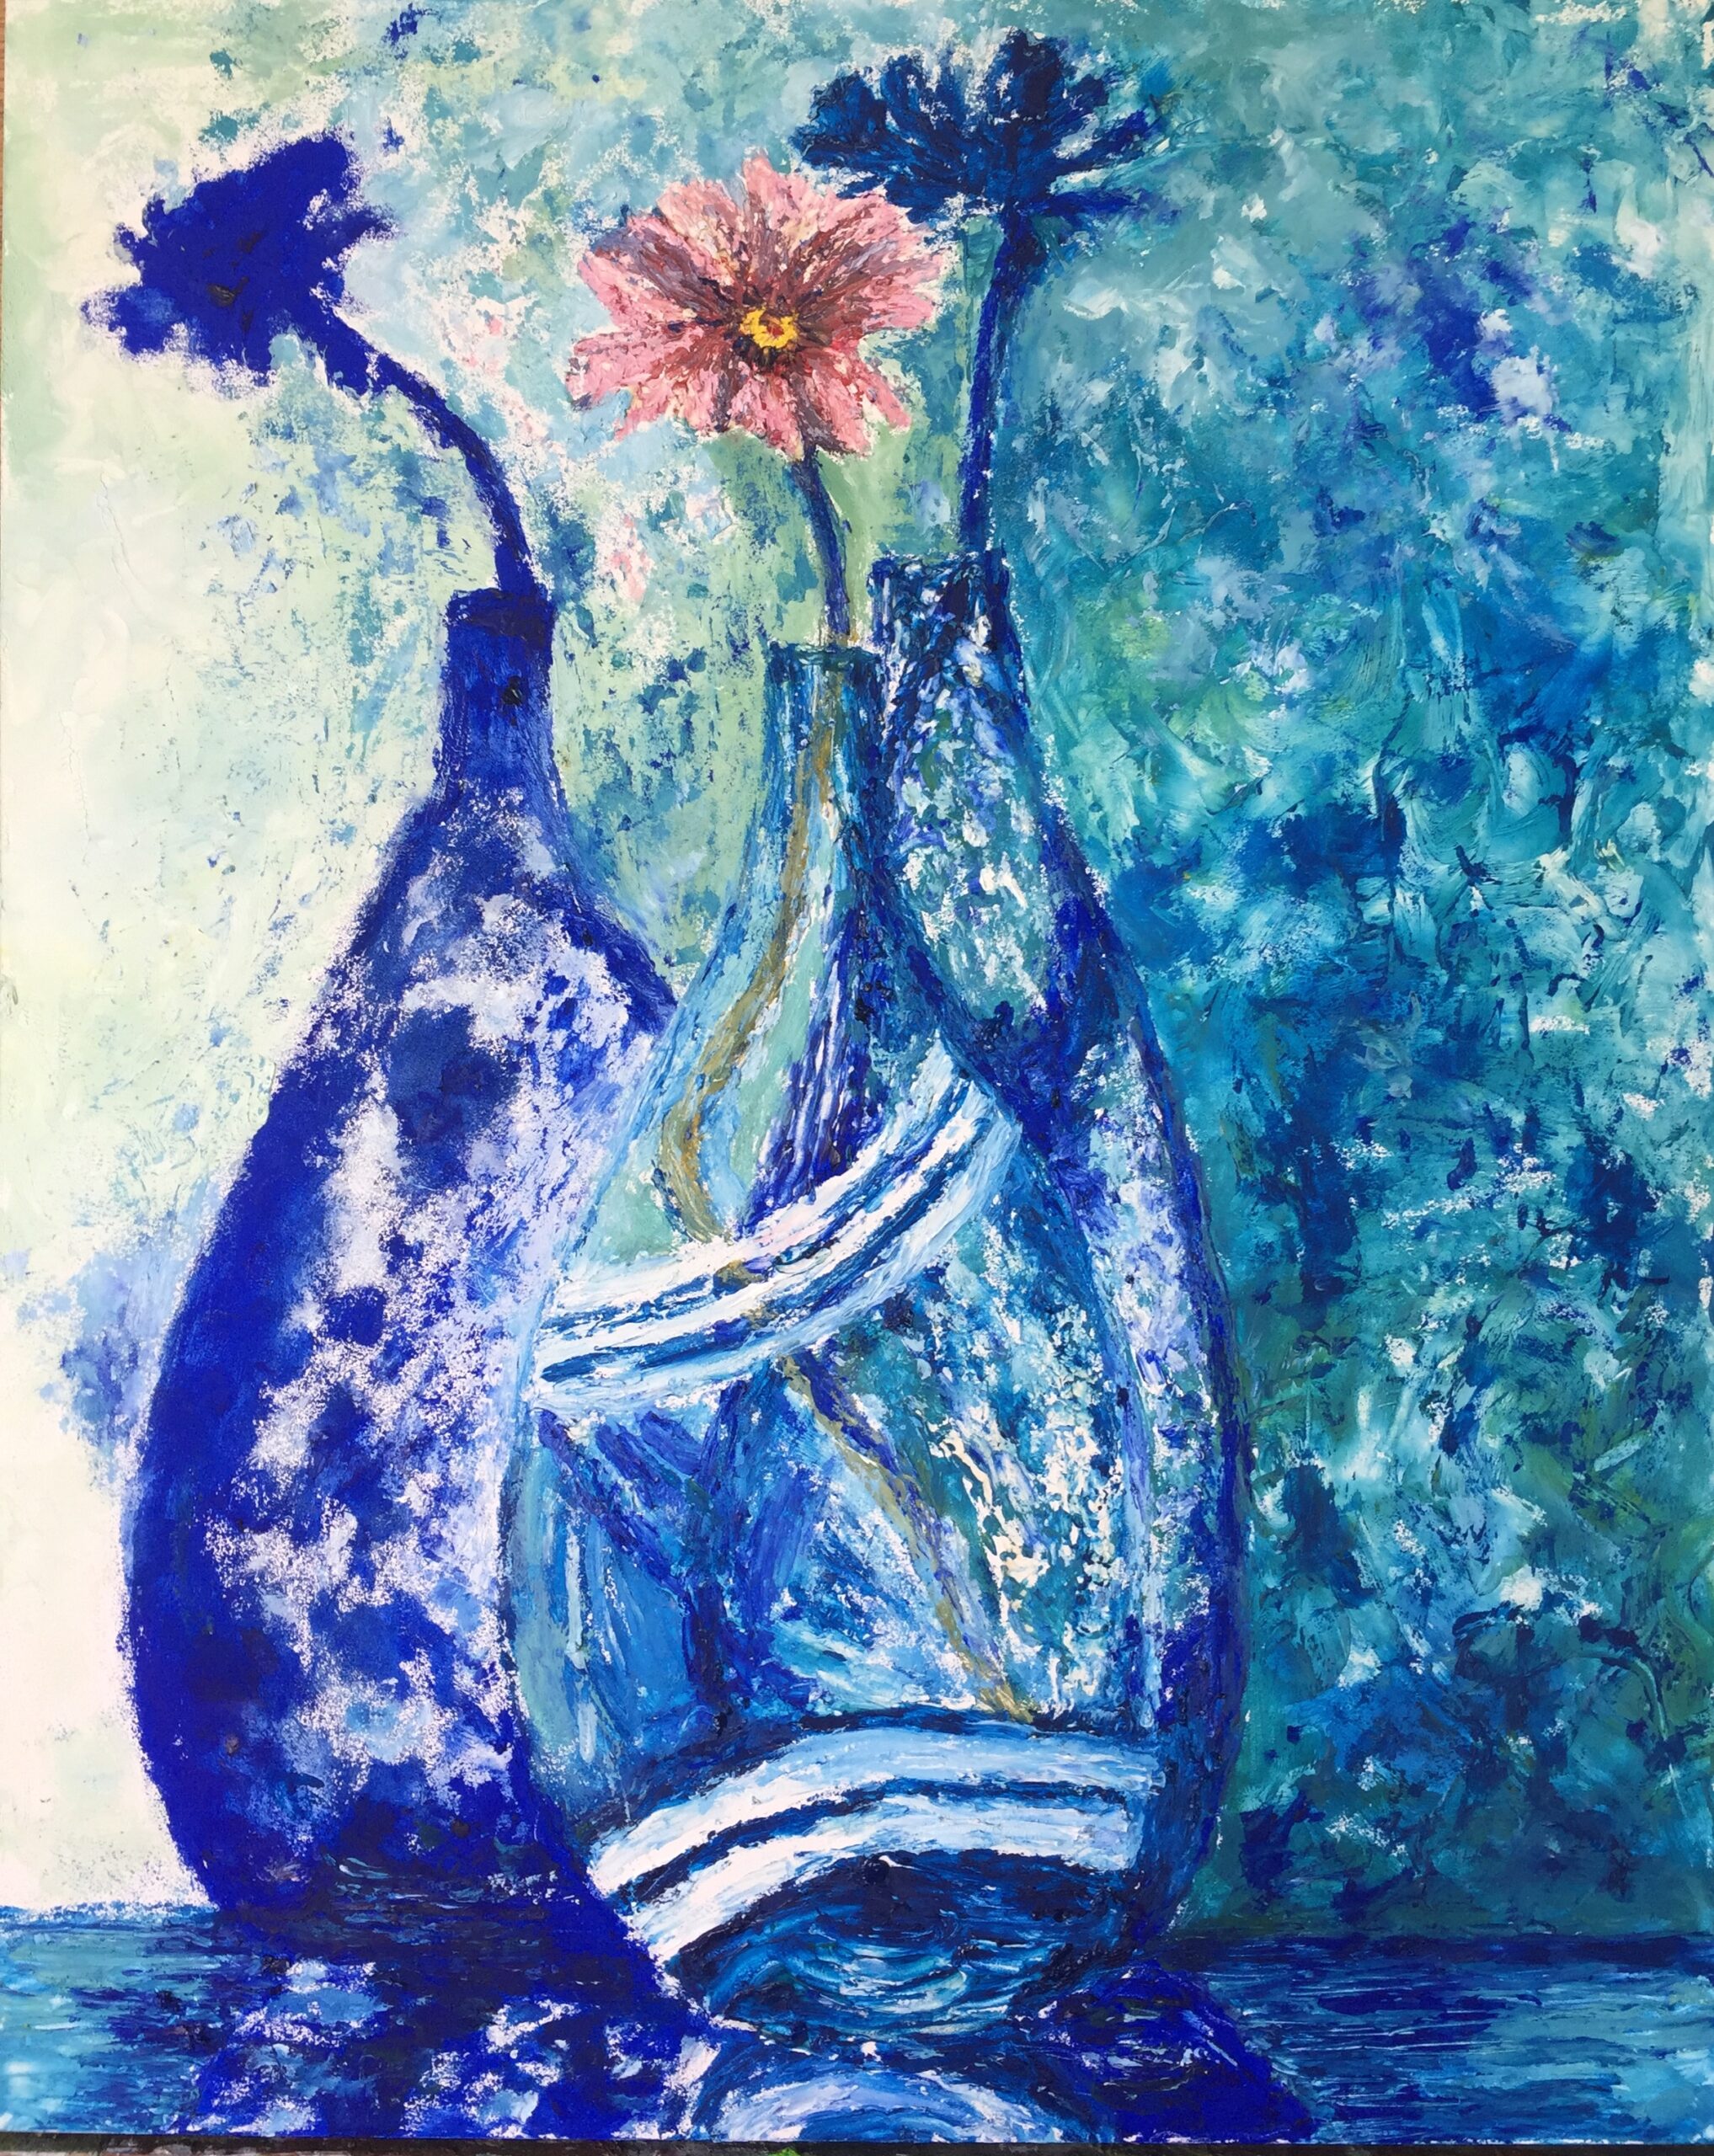 Original oil on canvas painting of a flower in a vase